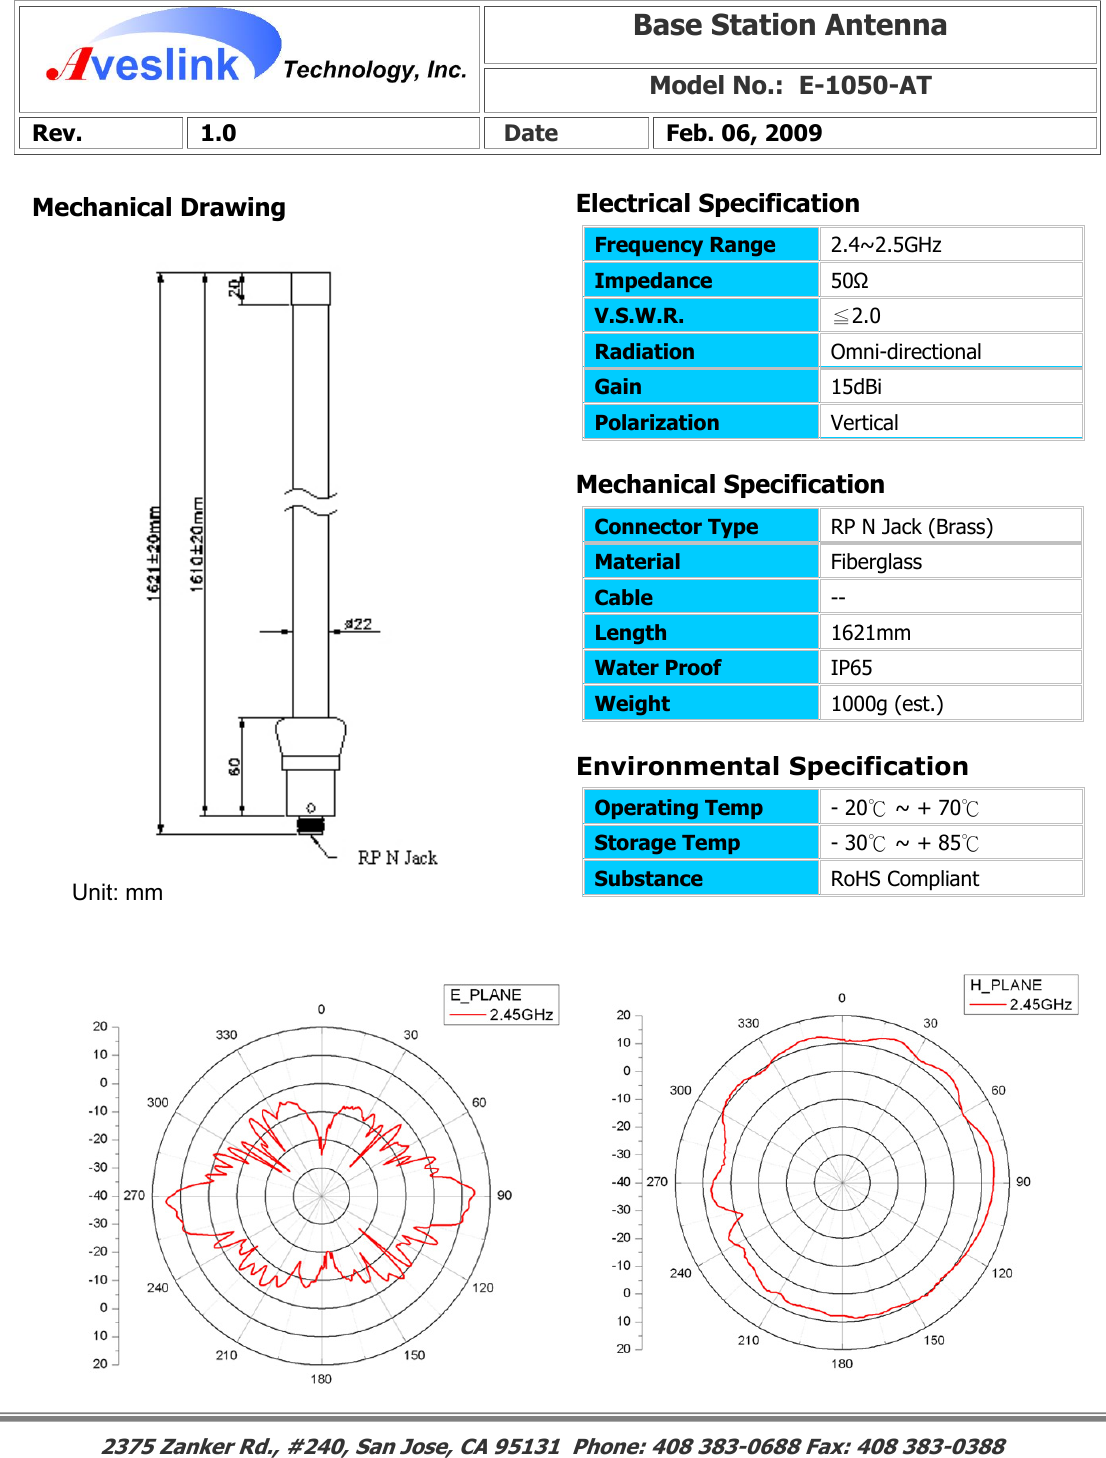 Mechanical DrawingMechanical Specification Environmental SpecificationBase Station Antenna Model No.:  E-1050-AT Rev. 1.0   Date  Feb. 06, 2009 Connector Type   RP N Jack (Brass) Material  Fiberglass Cable  -- Length  1621mm Water Proof  IP65 Weight  1000g (est.)                                                                                                                                                                                                                       2375 Zanker Rd., #240, San Jose, CA 95131  Phone: 408 383-0688 Fax: 408 383-0388 Operating Temp  - 20℃ ~ + 70℃  Storage Temp  - 30℃ ~ + 85℃  Substance  RoHS Compliant Electrical SpecificationFrequency Range   2.4~2.5GHz Impedance  50Ω V.S.W.R.  ≦2.0 Radiation  Omni-directional Gain  15dBi Polarization  Vertical Unit: mm 